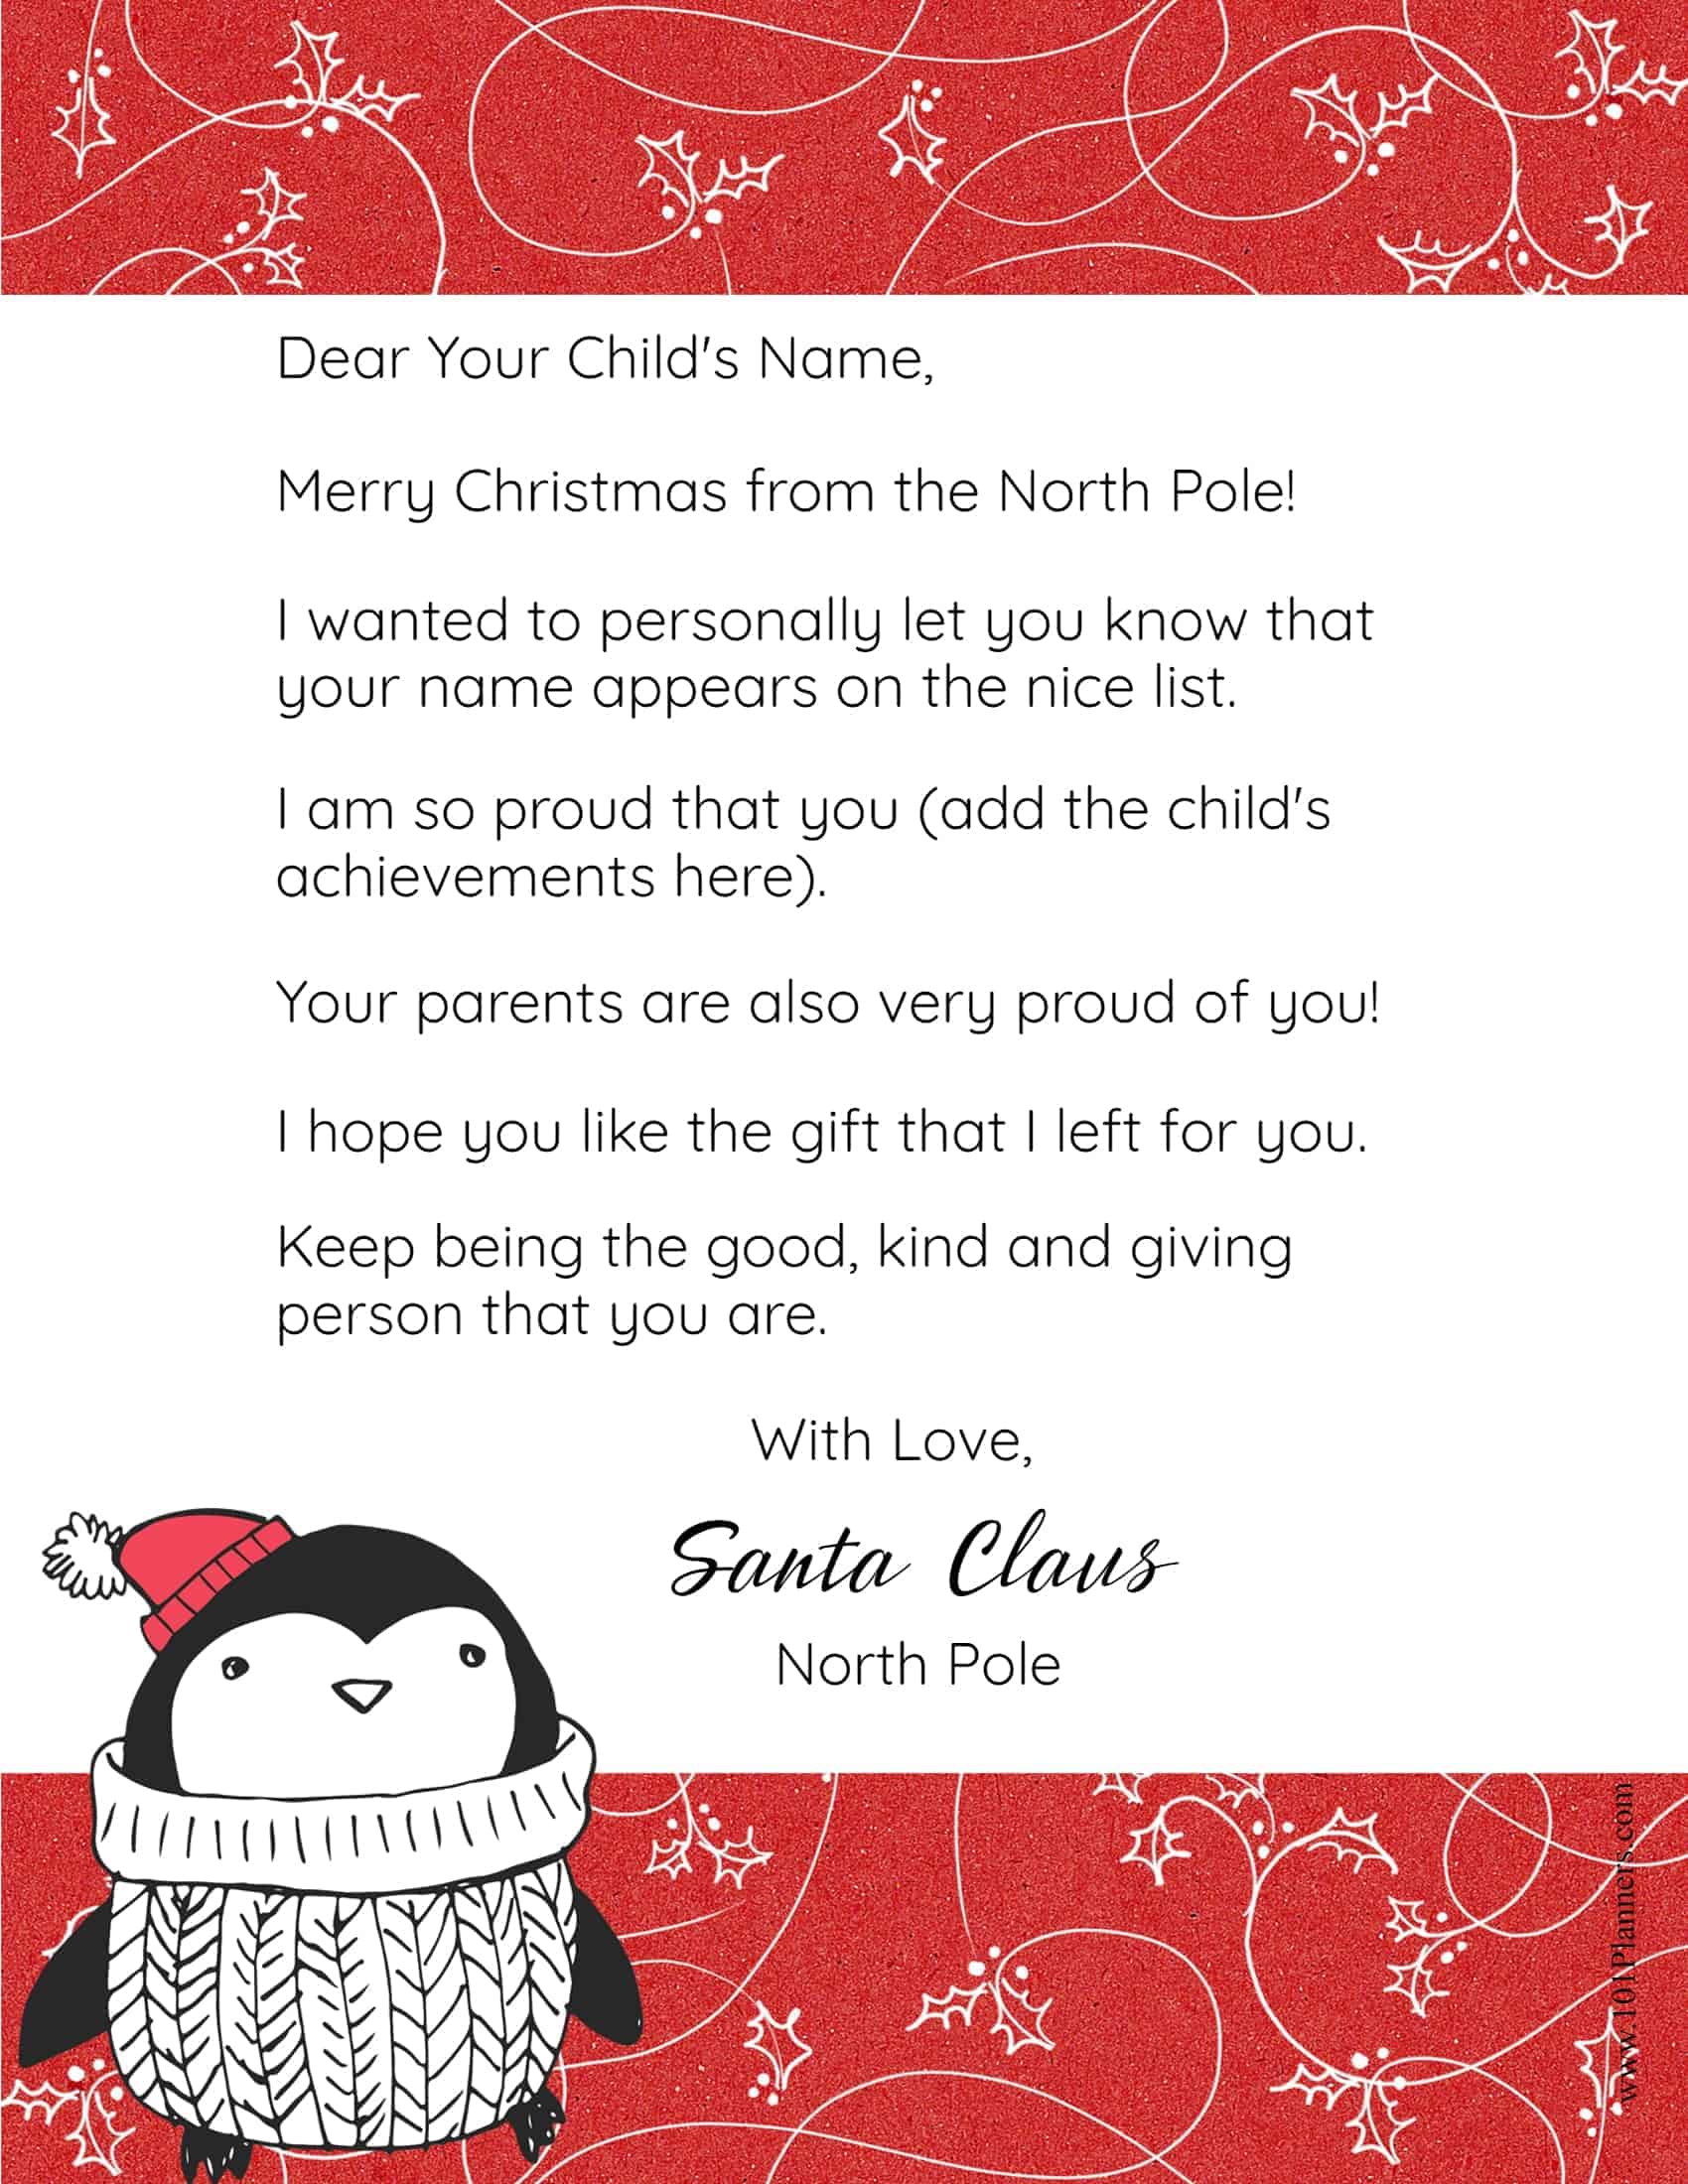 How To Send A Letter To Santa Claus